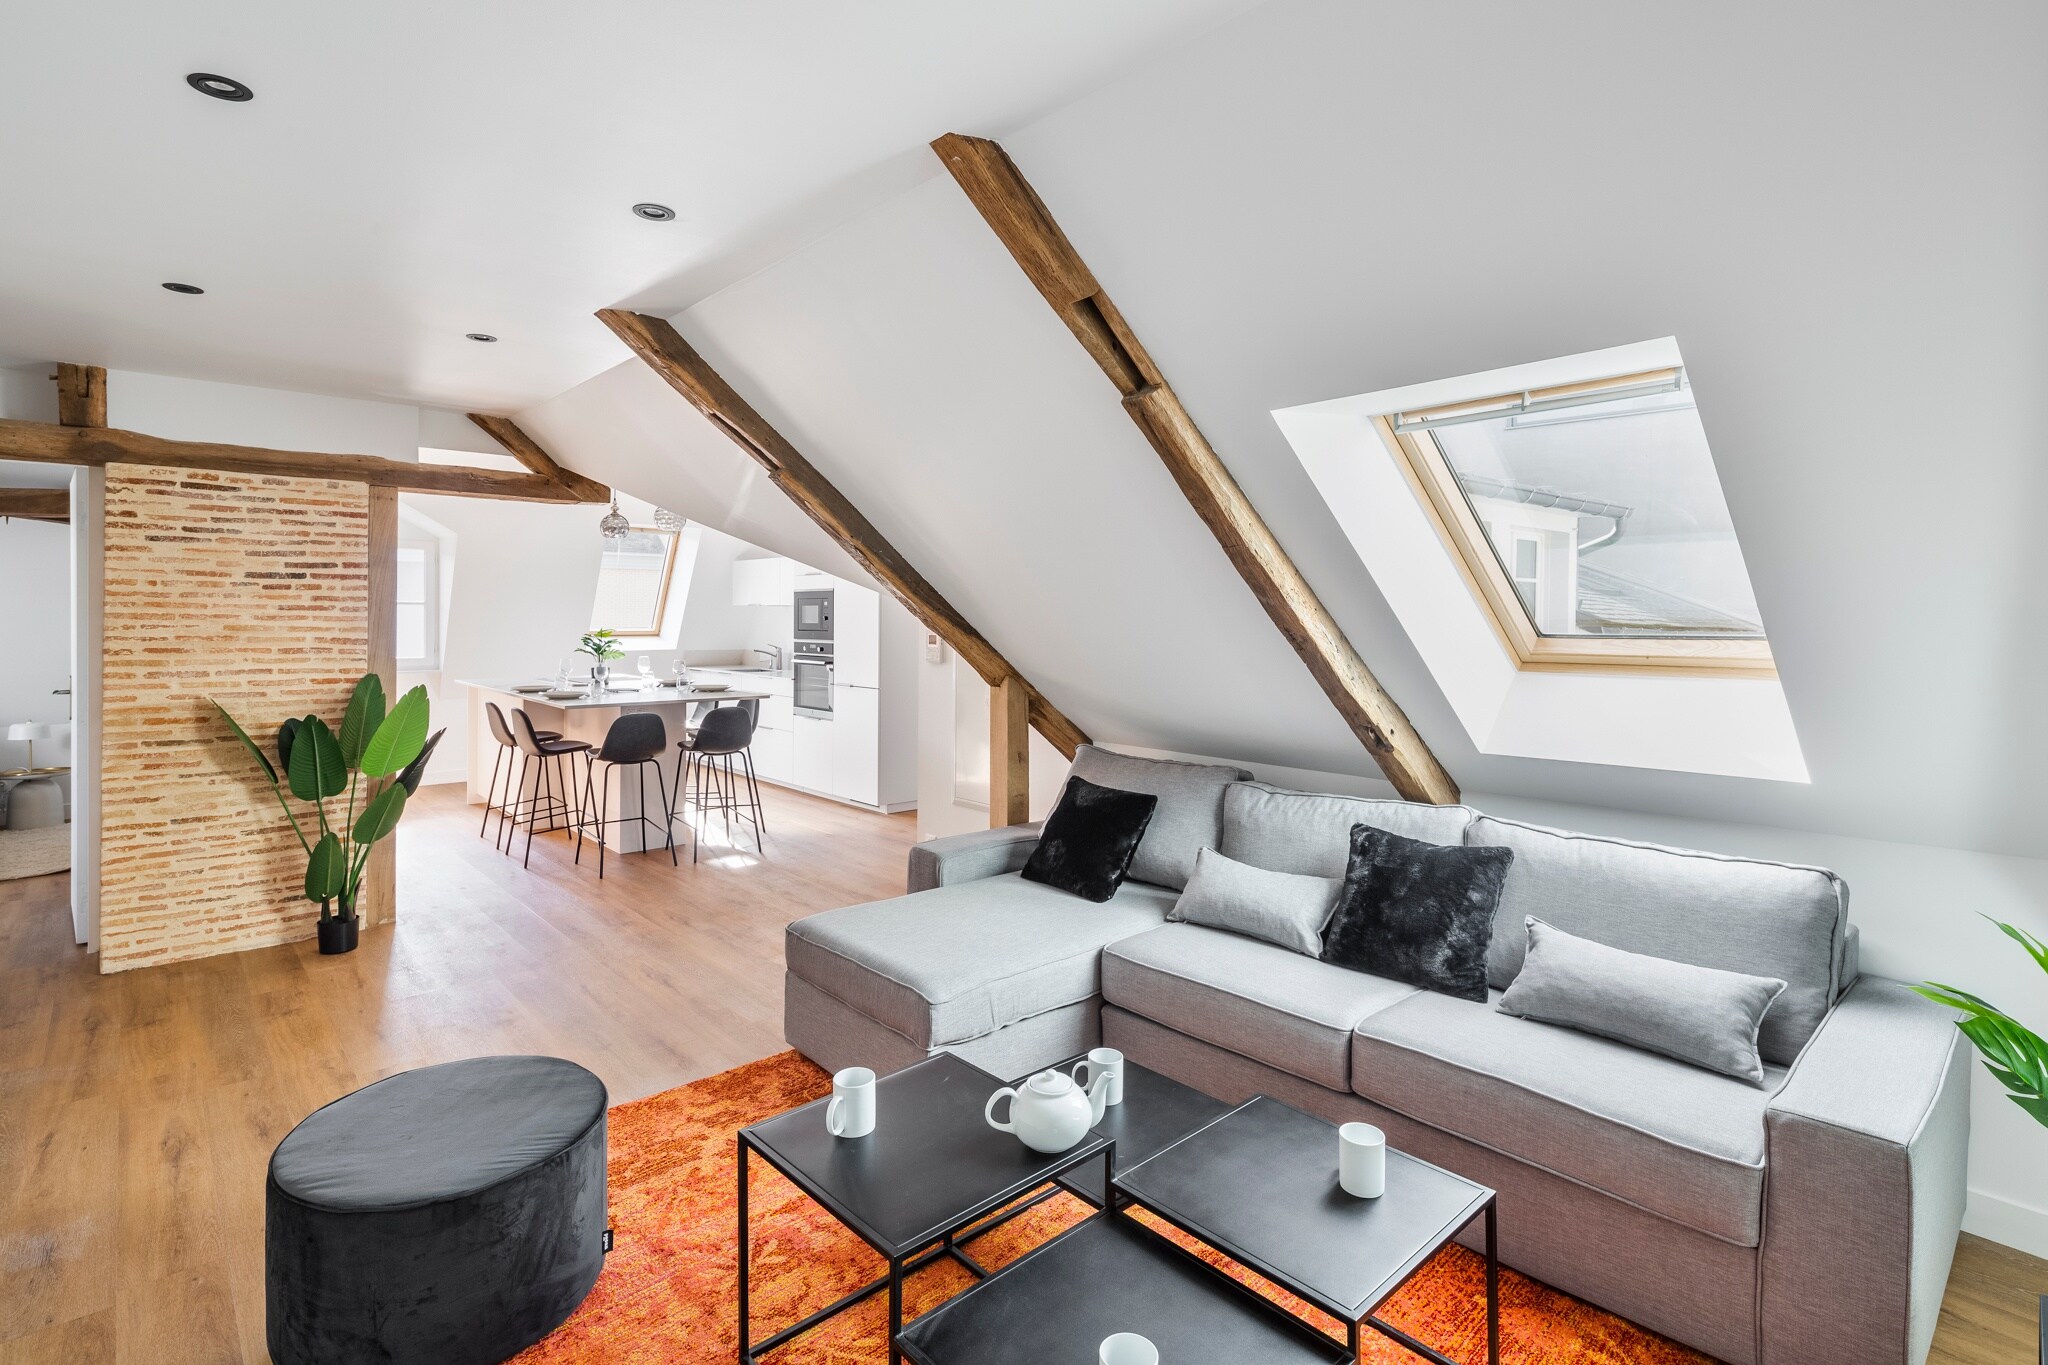 Property Image 1 - Charming luxury two bedroom apartment with exposed beam in Rennes